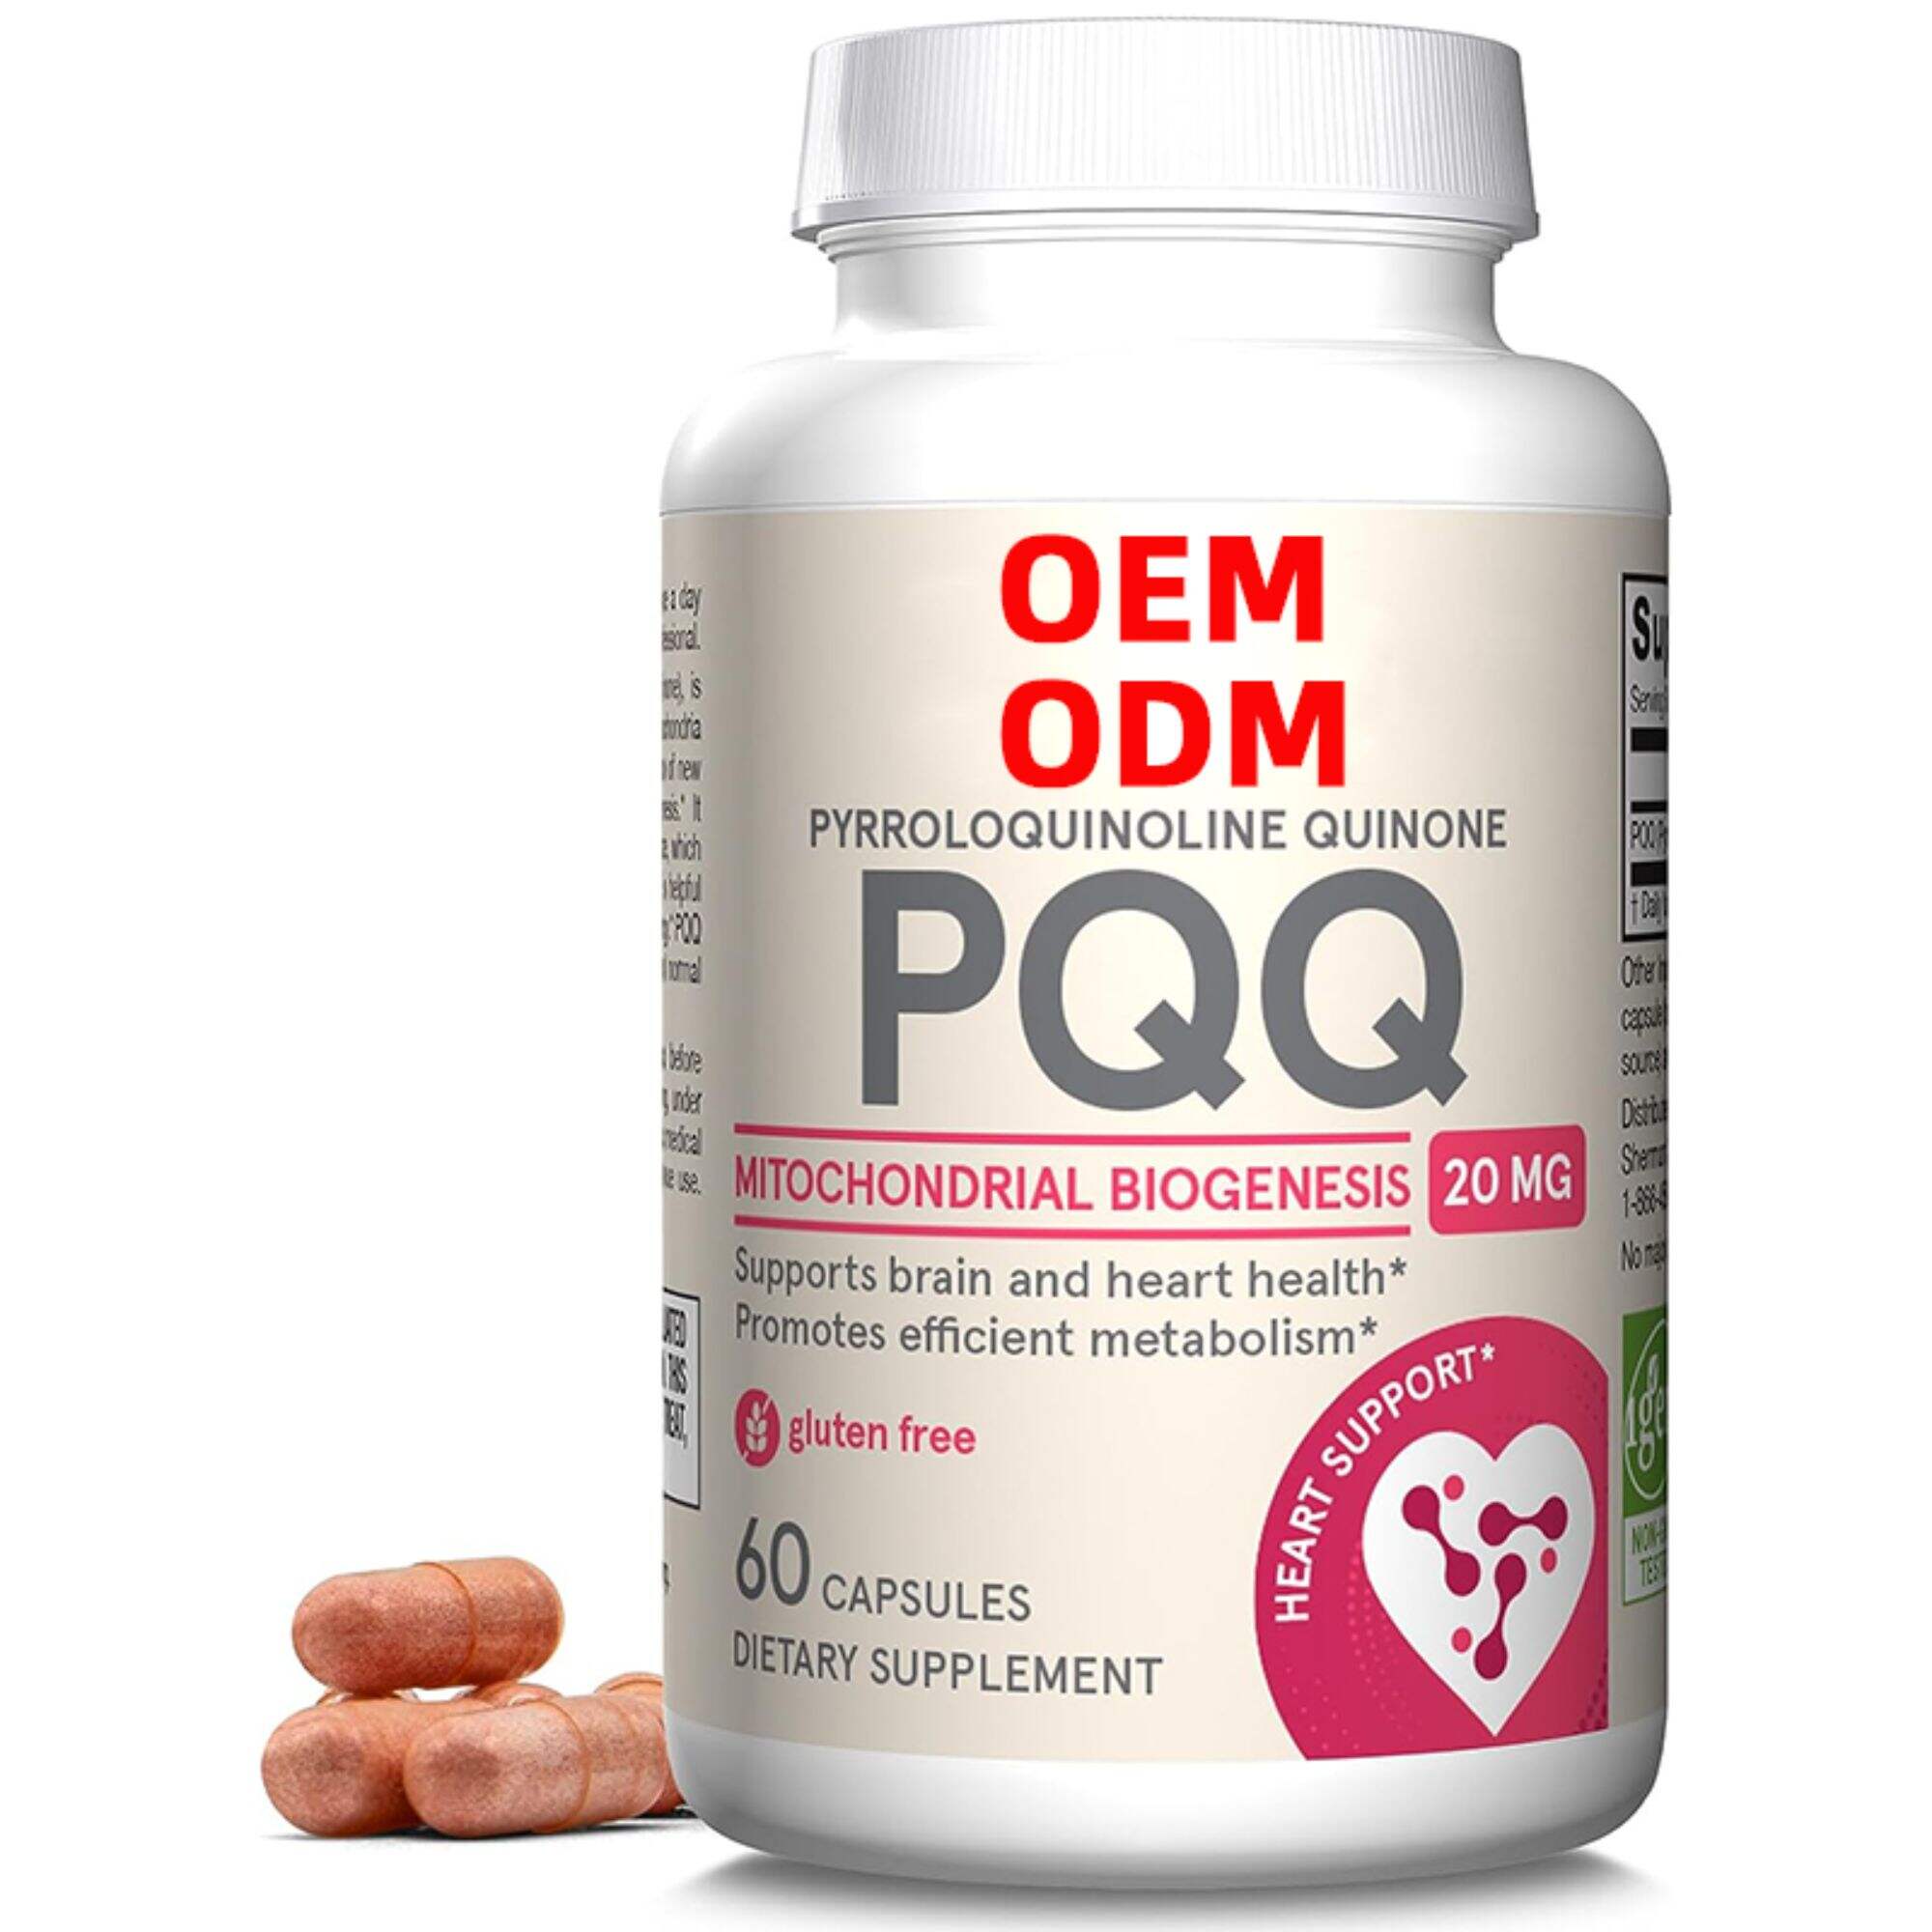 PQQ 20 mg - 60 Servings (Capsules) - Aids Mitochondrial Biogenesis & Metabolism - Supports Brain, Heart Health & Cognitive Function - PQQ Dietary Supplement - Gluten Free